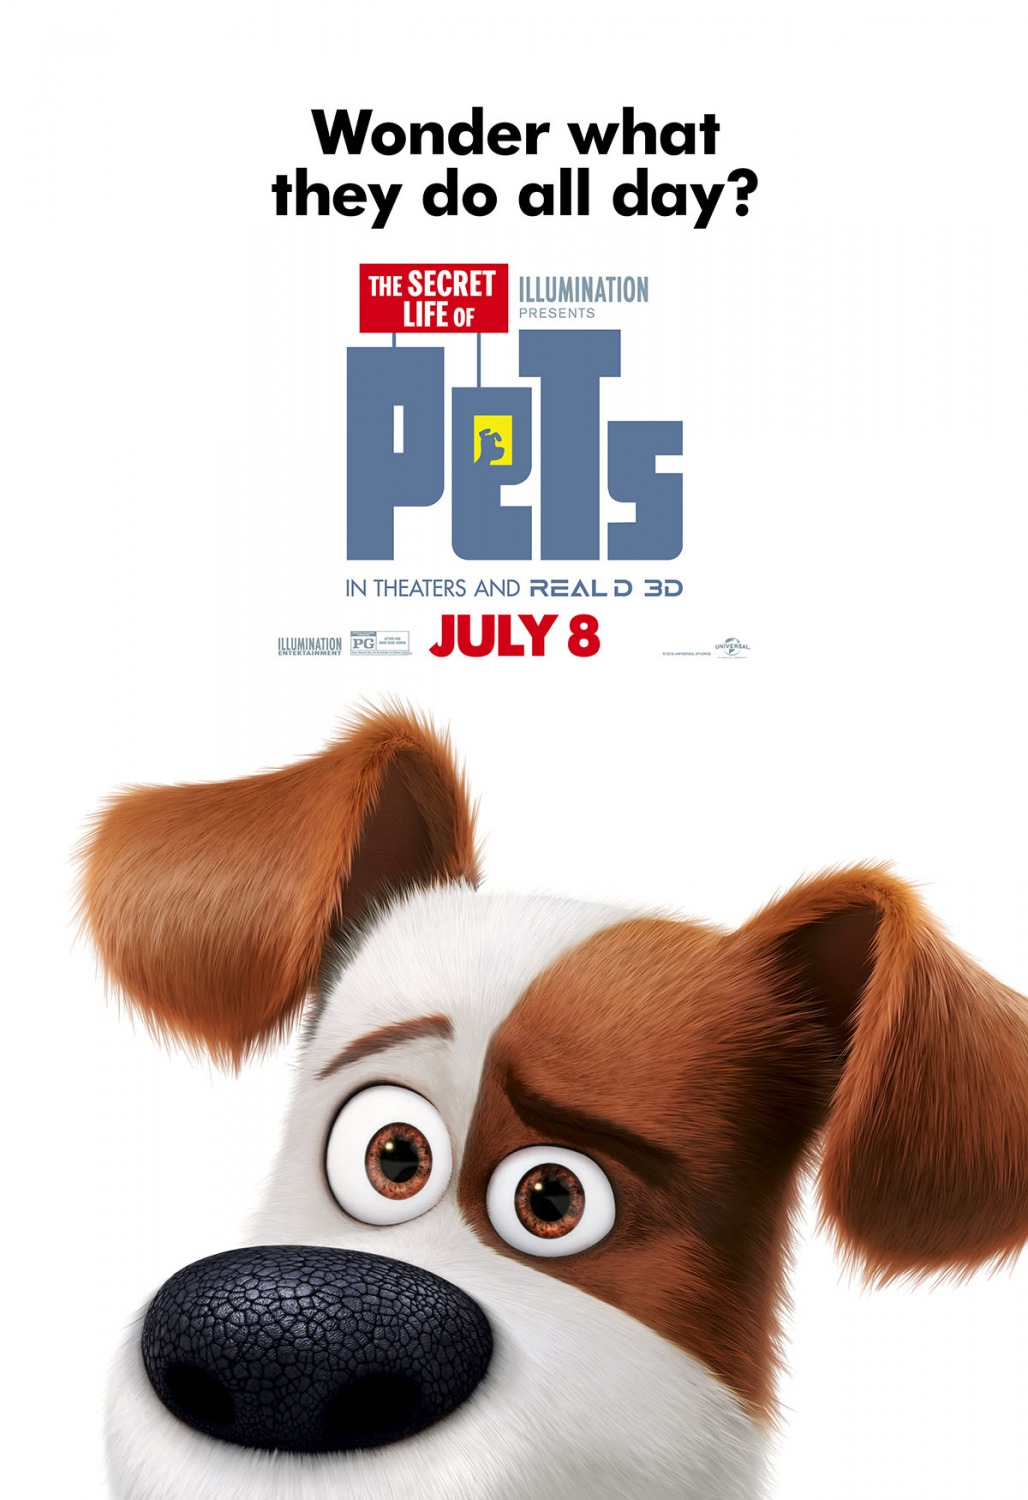 The Entertainment Factor: THE SECRET LIFE OF PETS Clips and Posters